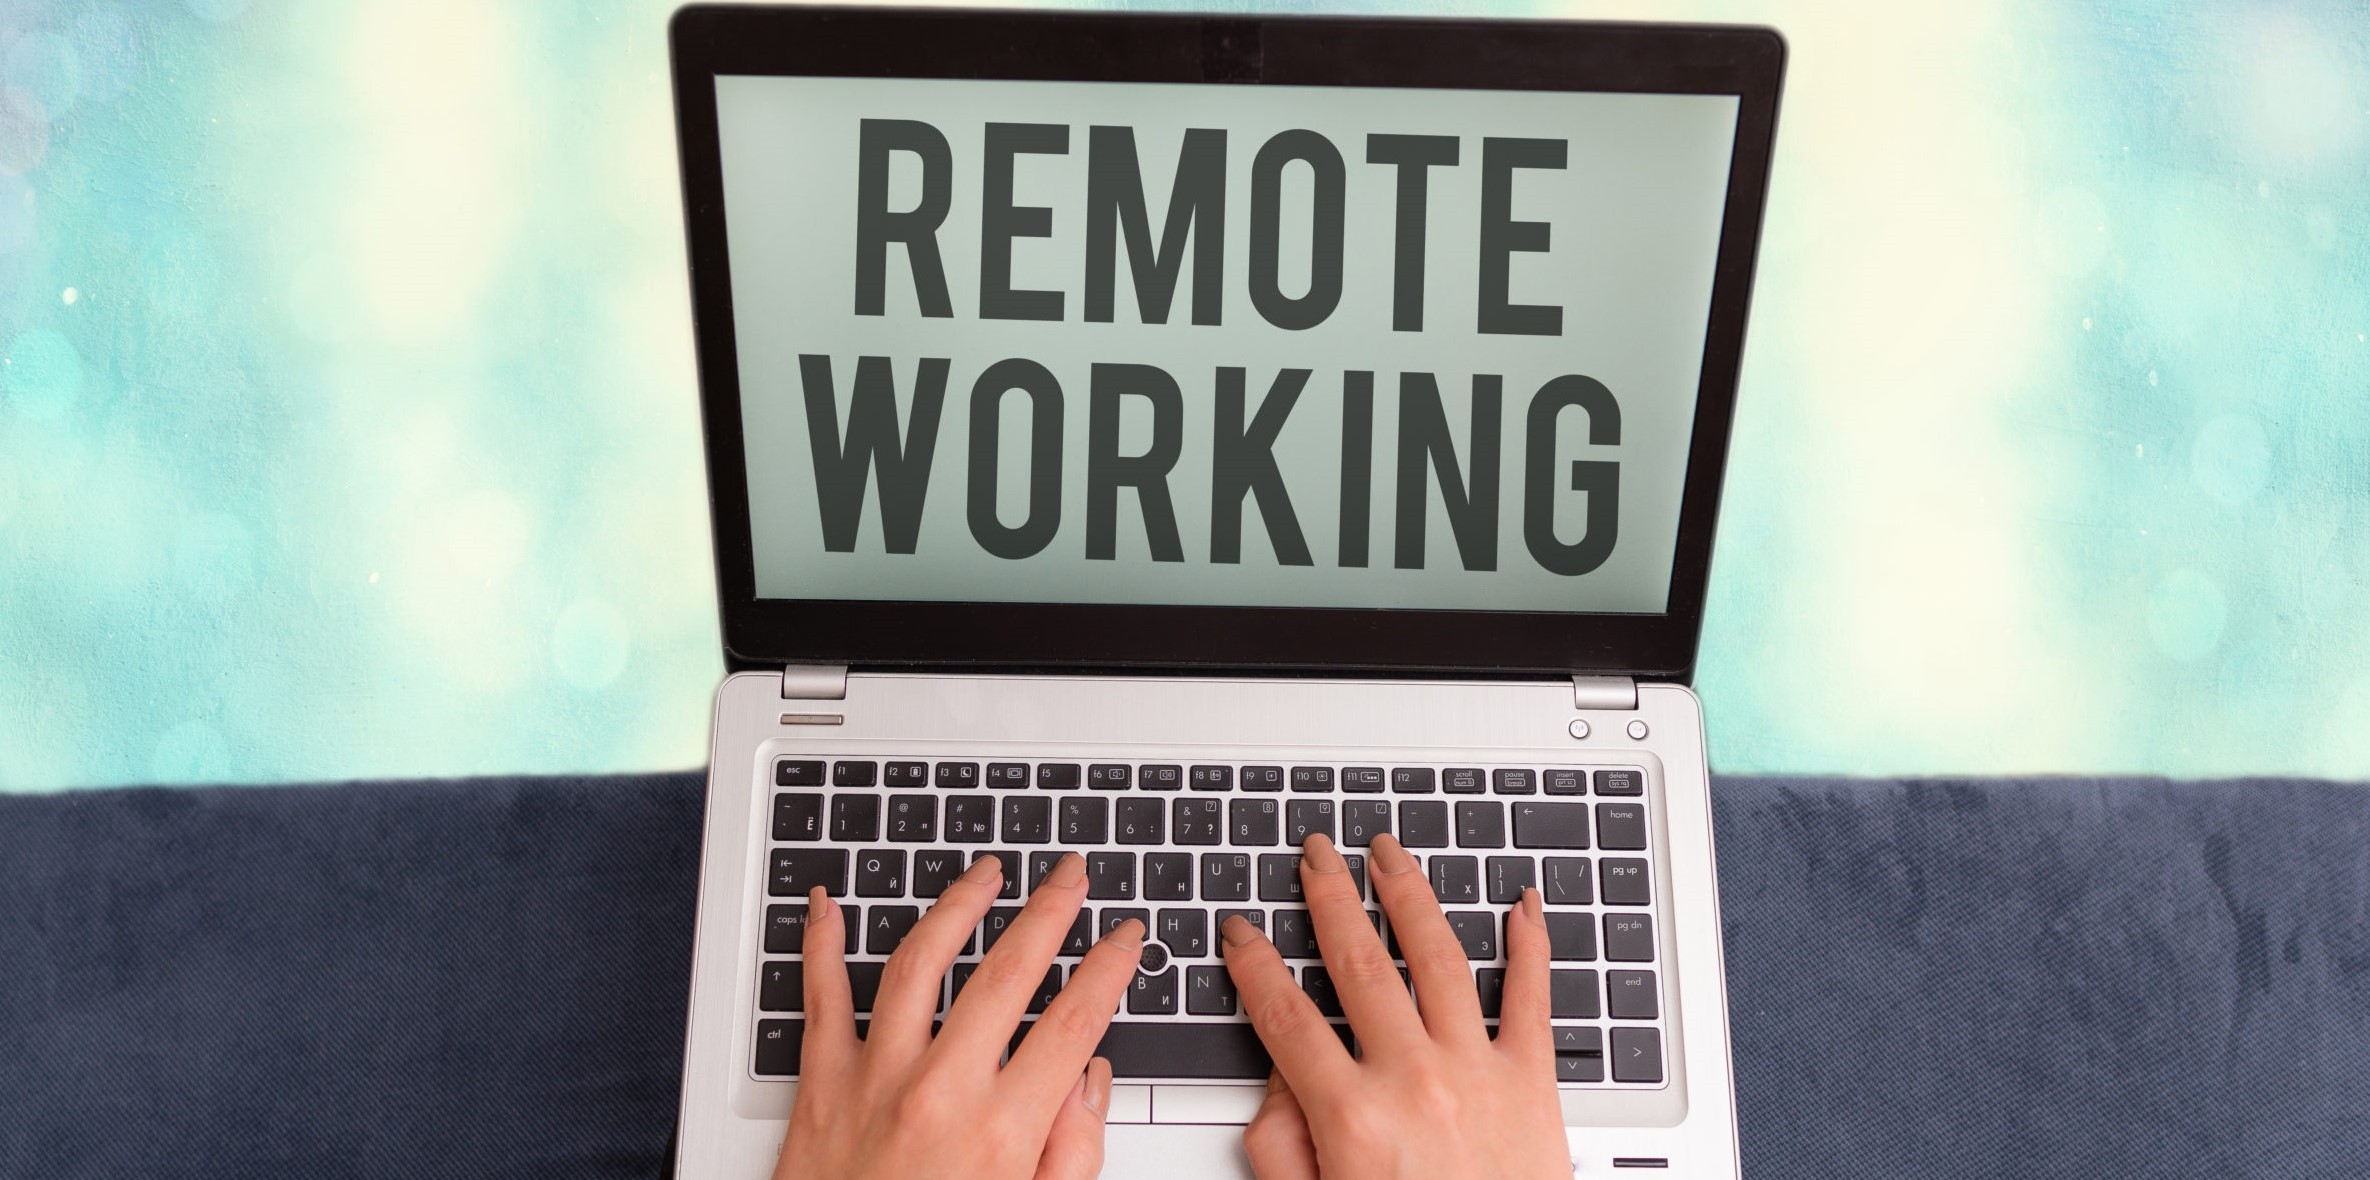 Another setback for remote work visa